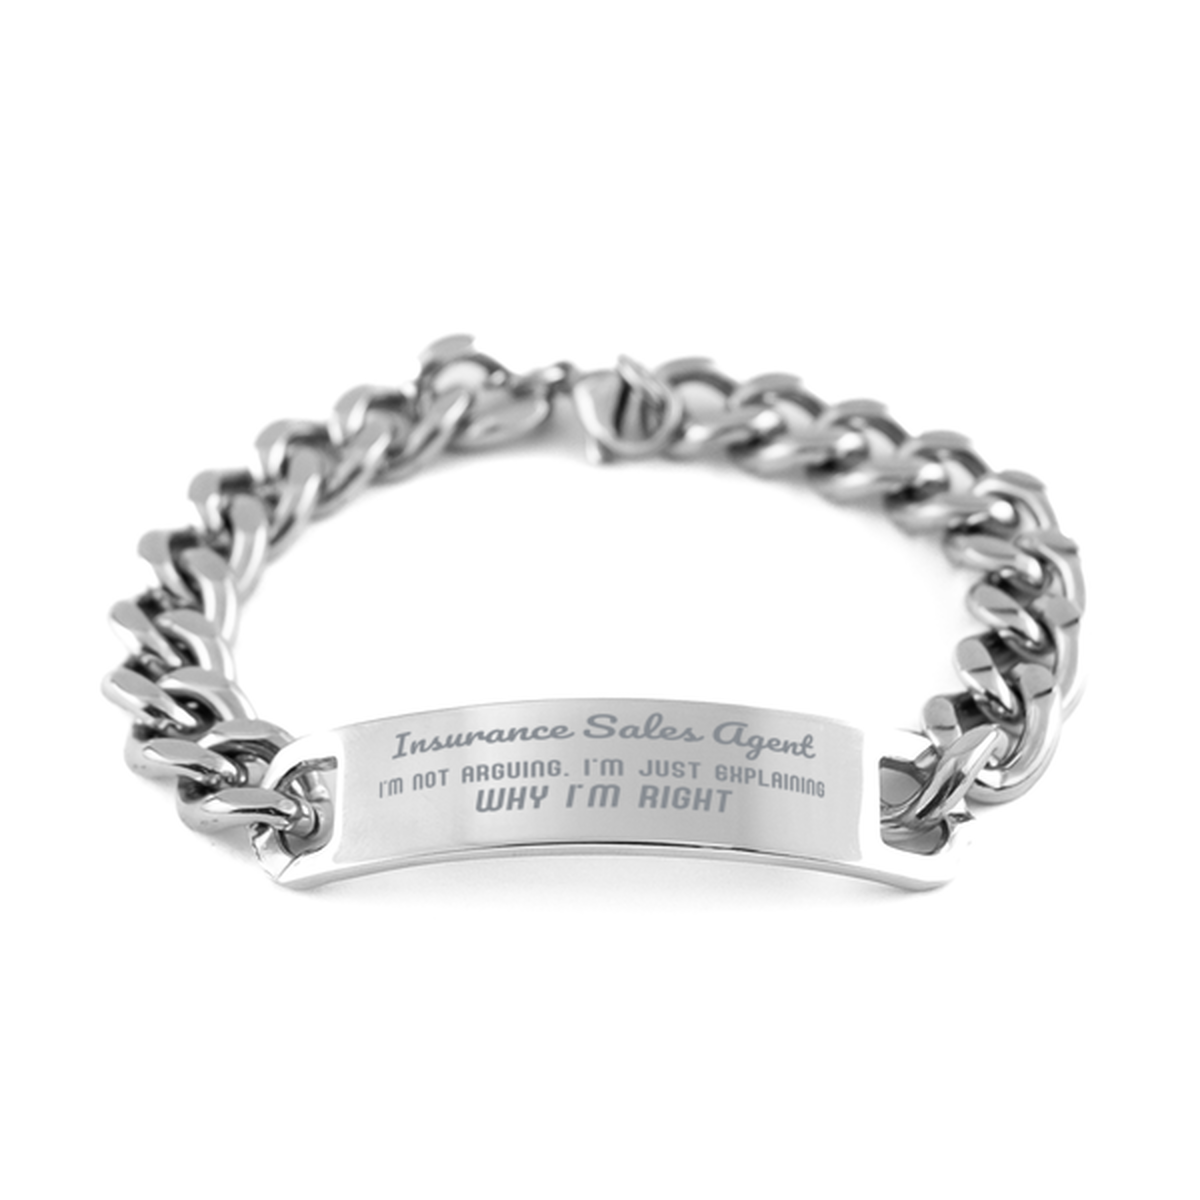 Insurance Sales Agent I'm not Arguing. I'm Just Explaining Why I'm RIGHT Cuban Chain Stainless Steel Bracelet, Graduation Birthday Christmas Insurance Sales Agent Gifts For Insurance Sales Agent Funny Saying Quote Present for Men Women Coworker